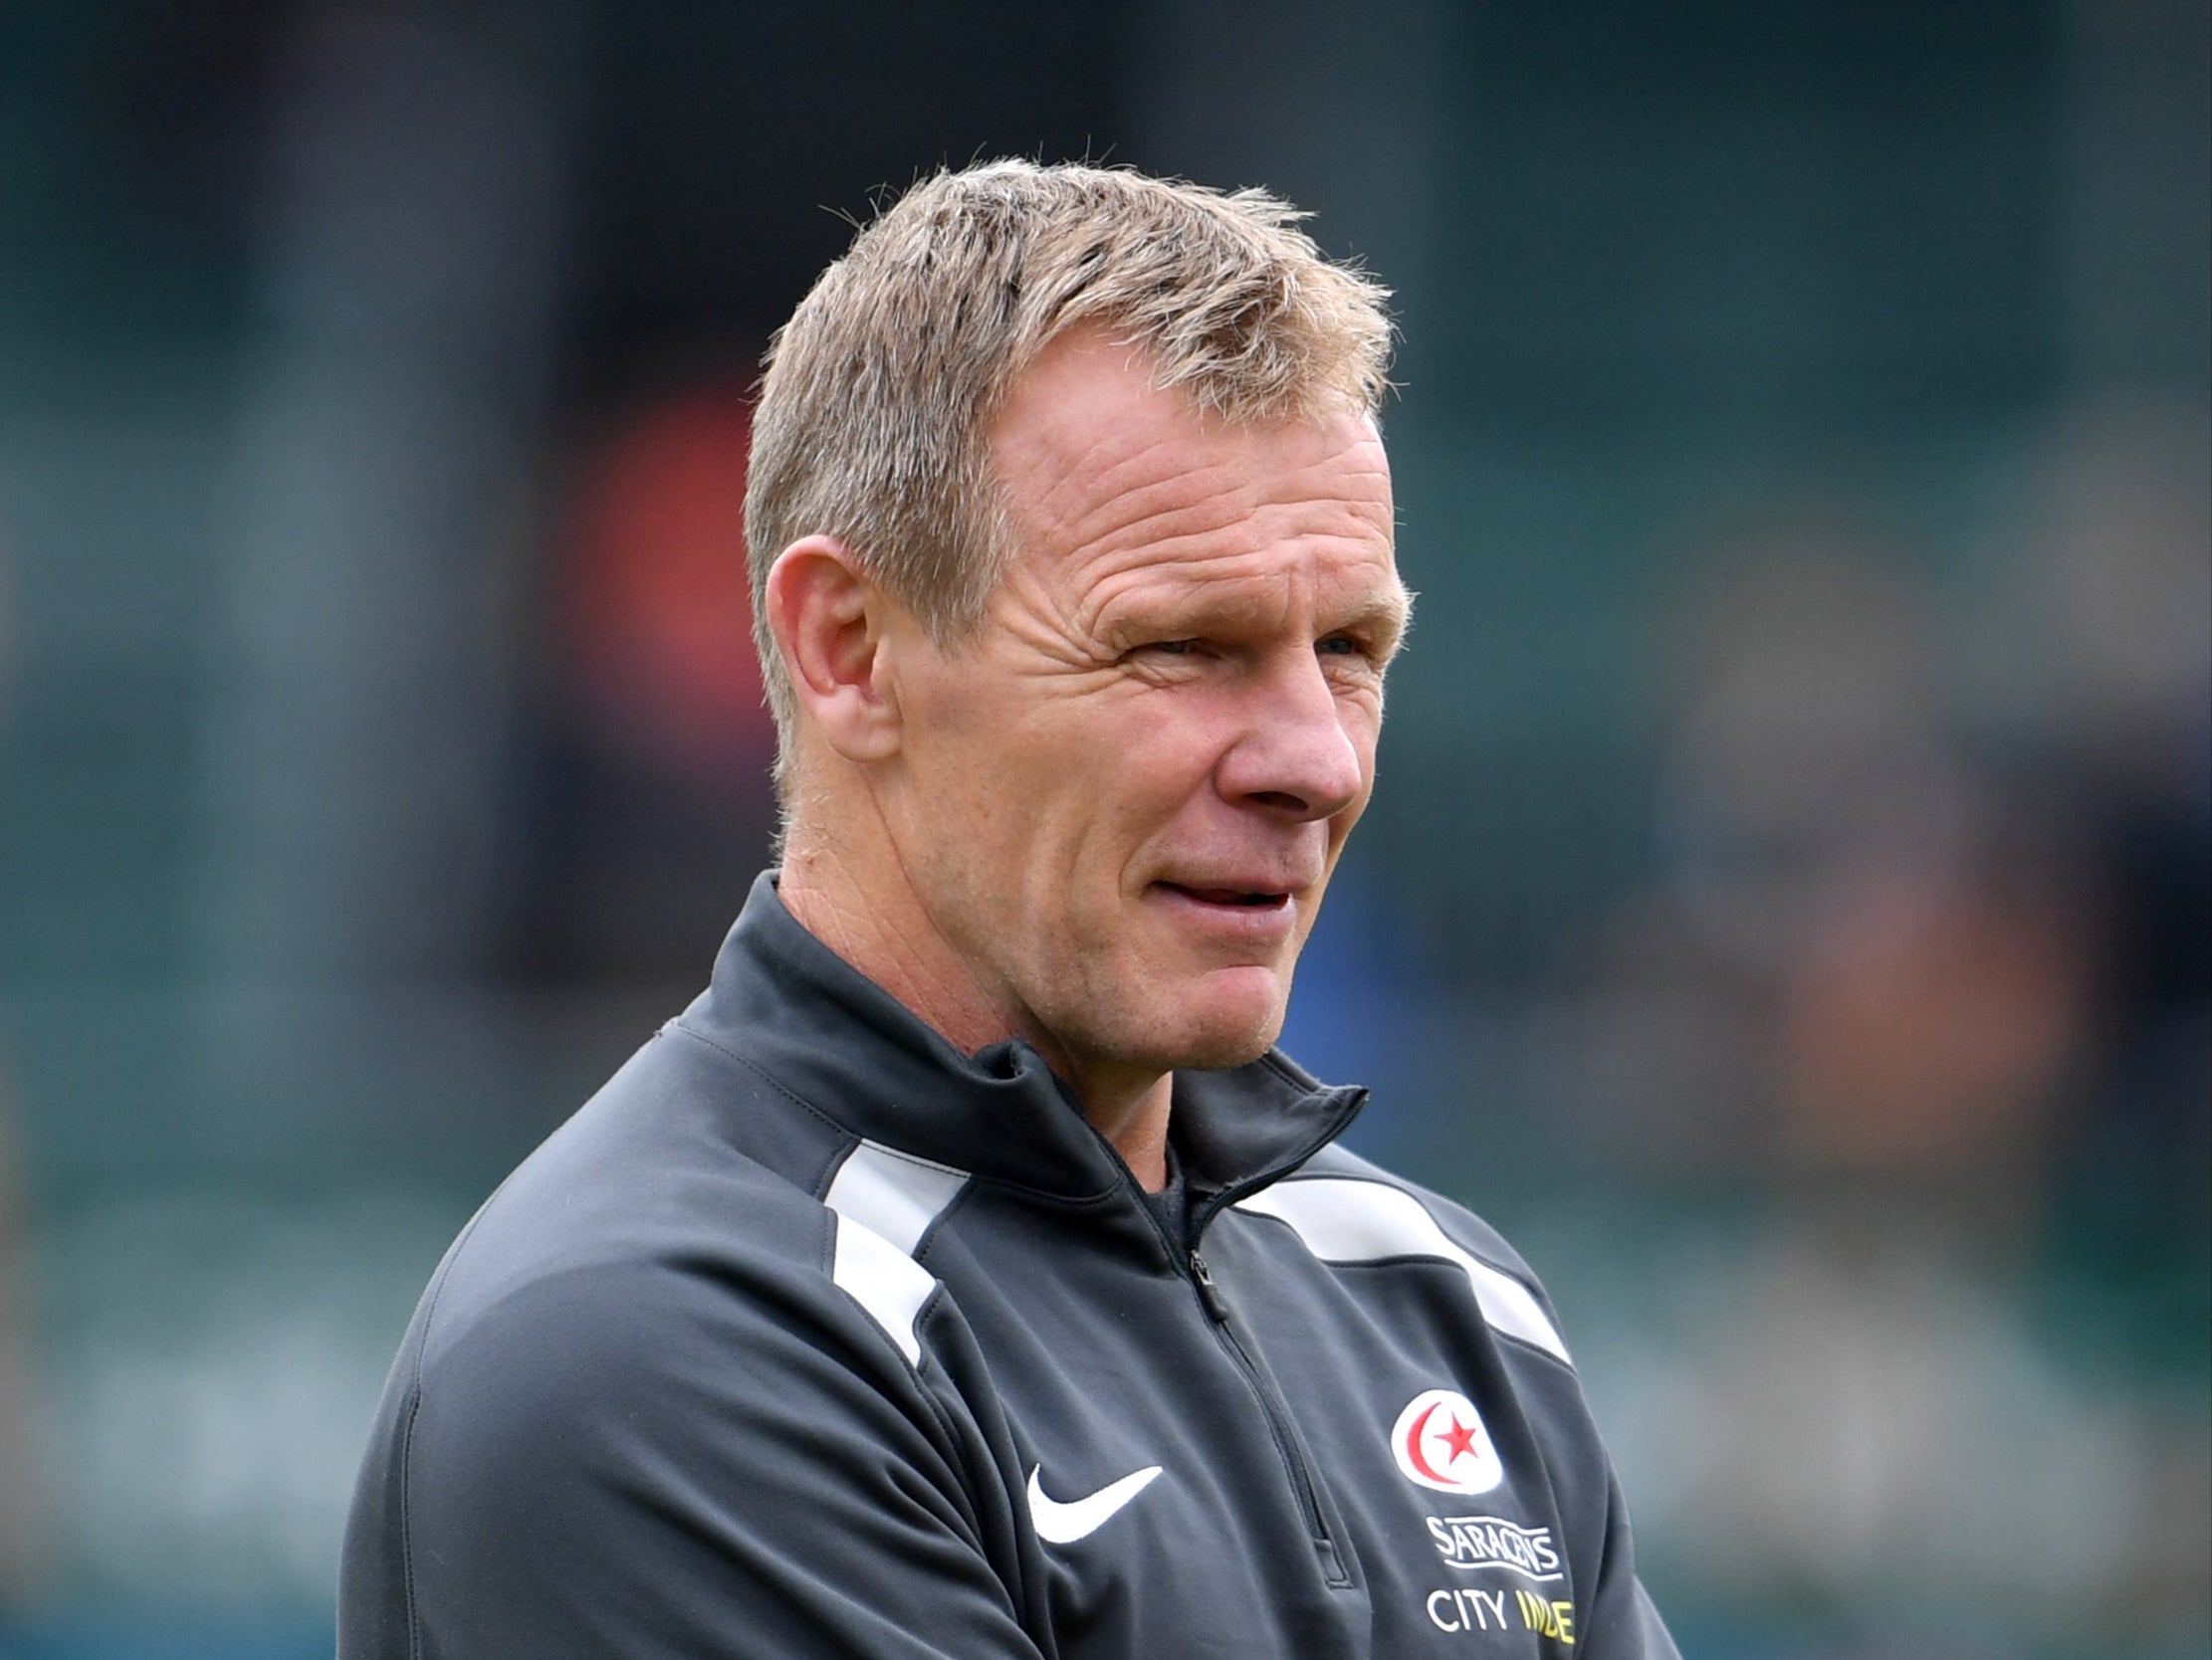 Saracens director of rugby Mark McCall is to take a short break for medical reasons